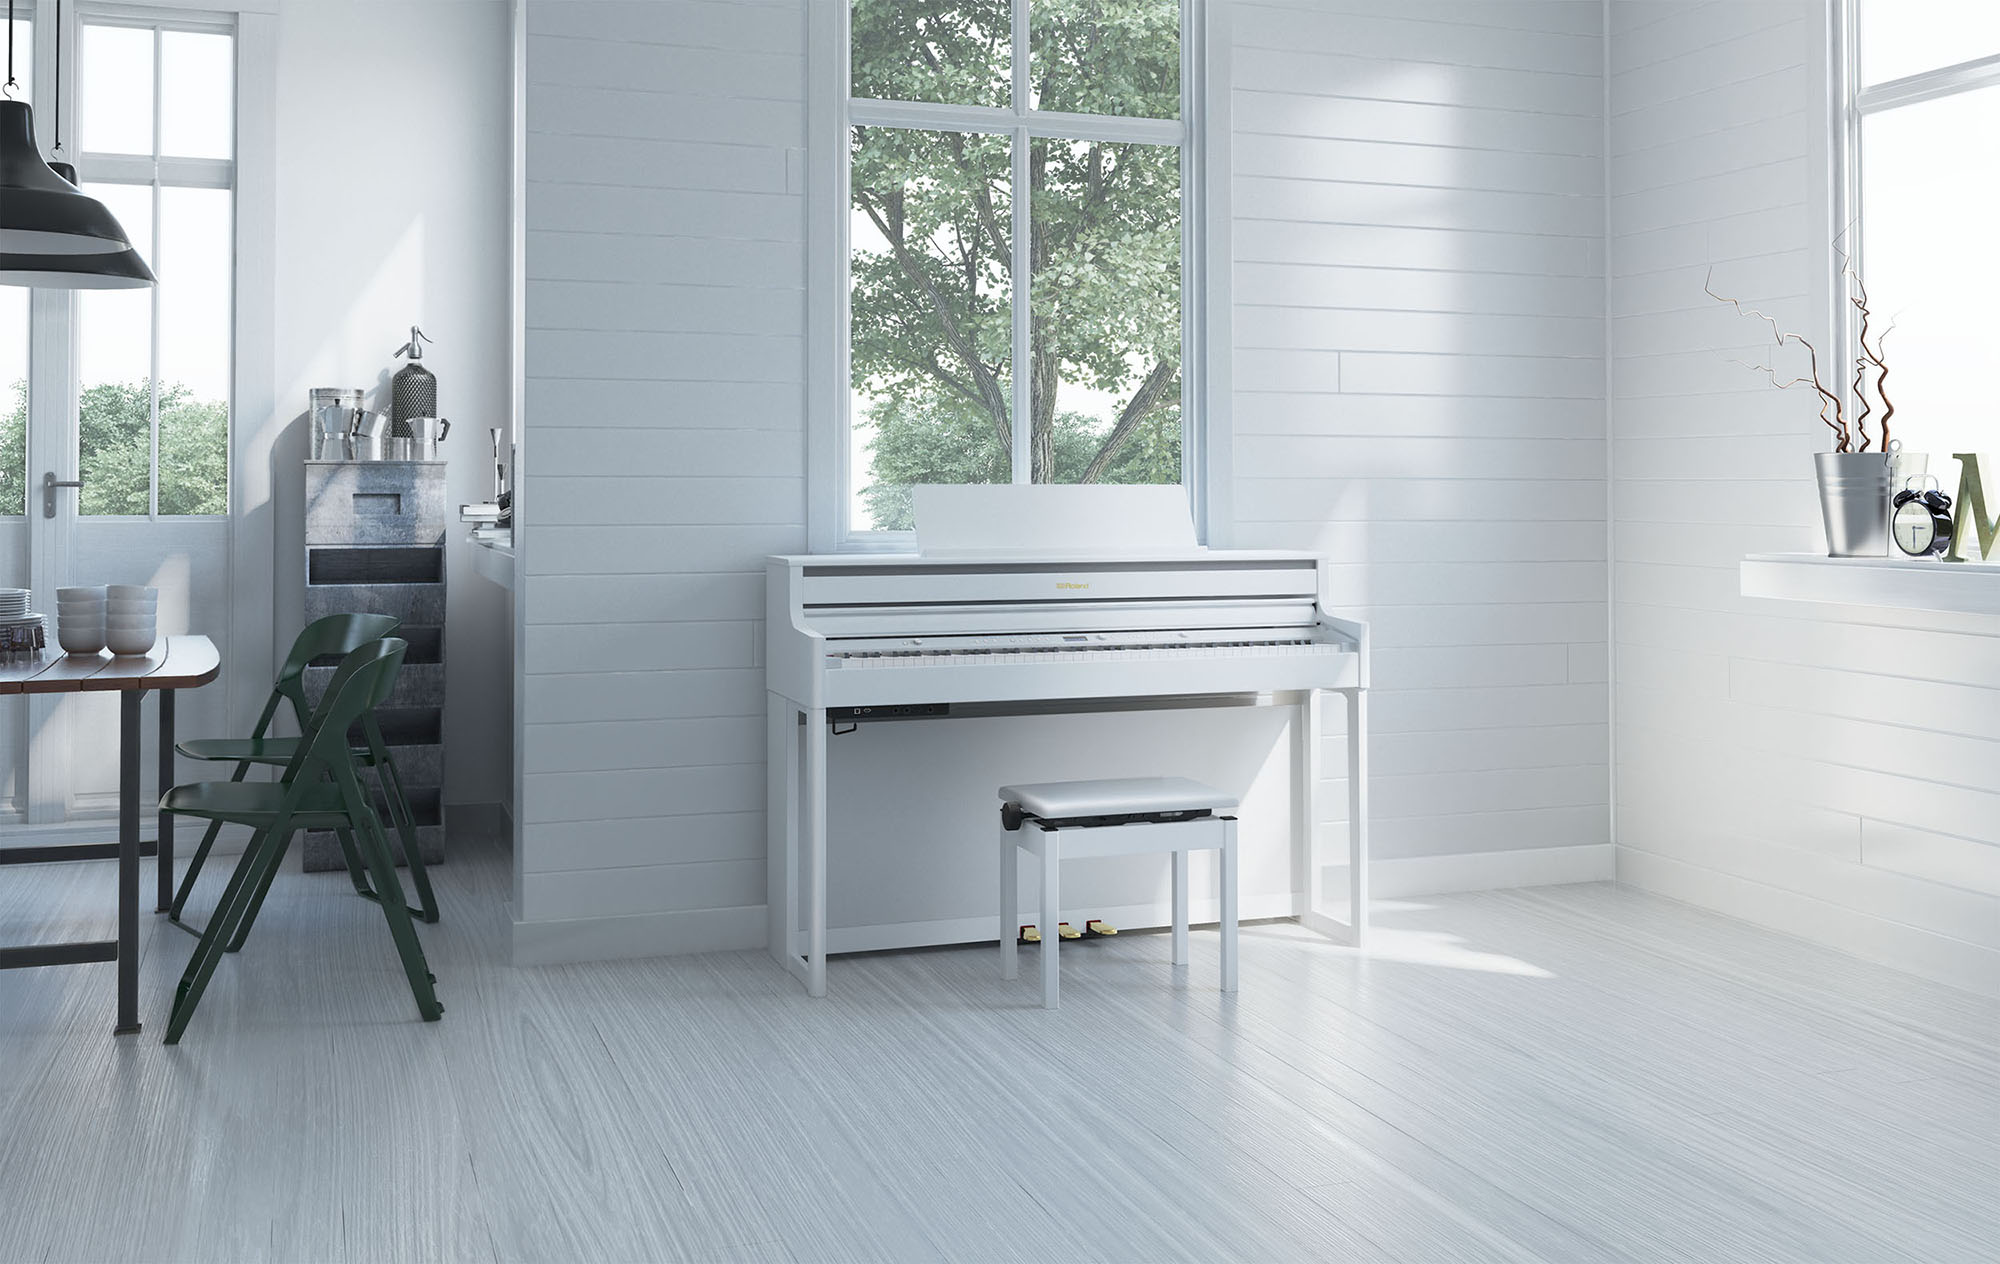 Roland Hp 702 Wh White - Digitale piano met meubel - Variation 1